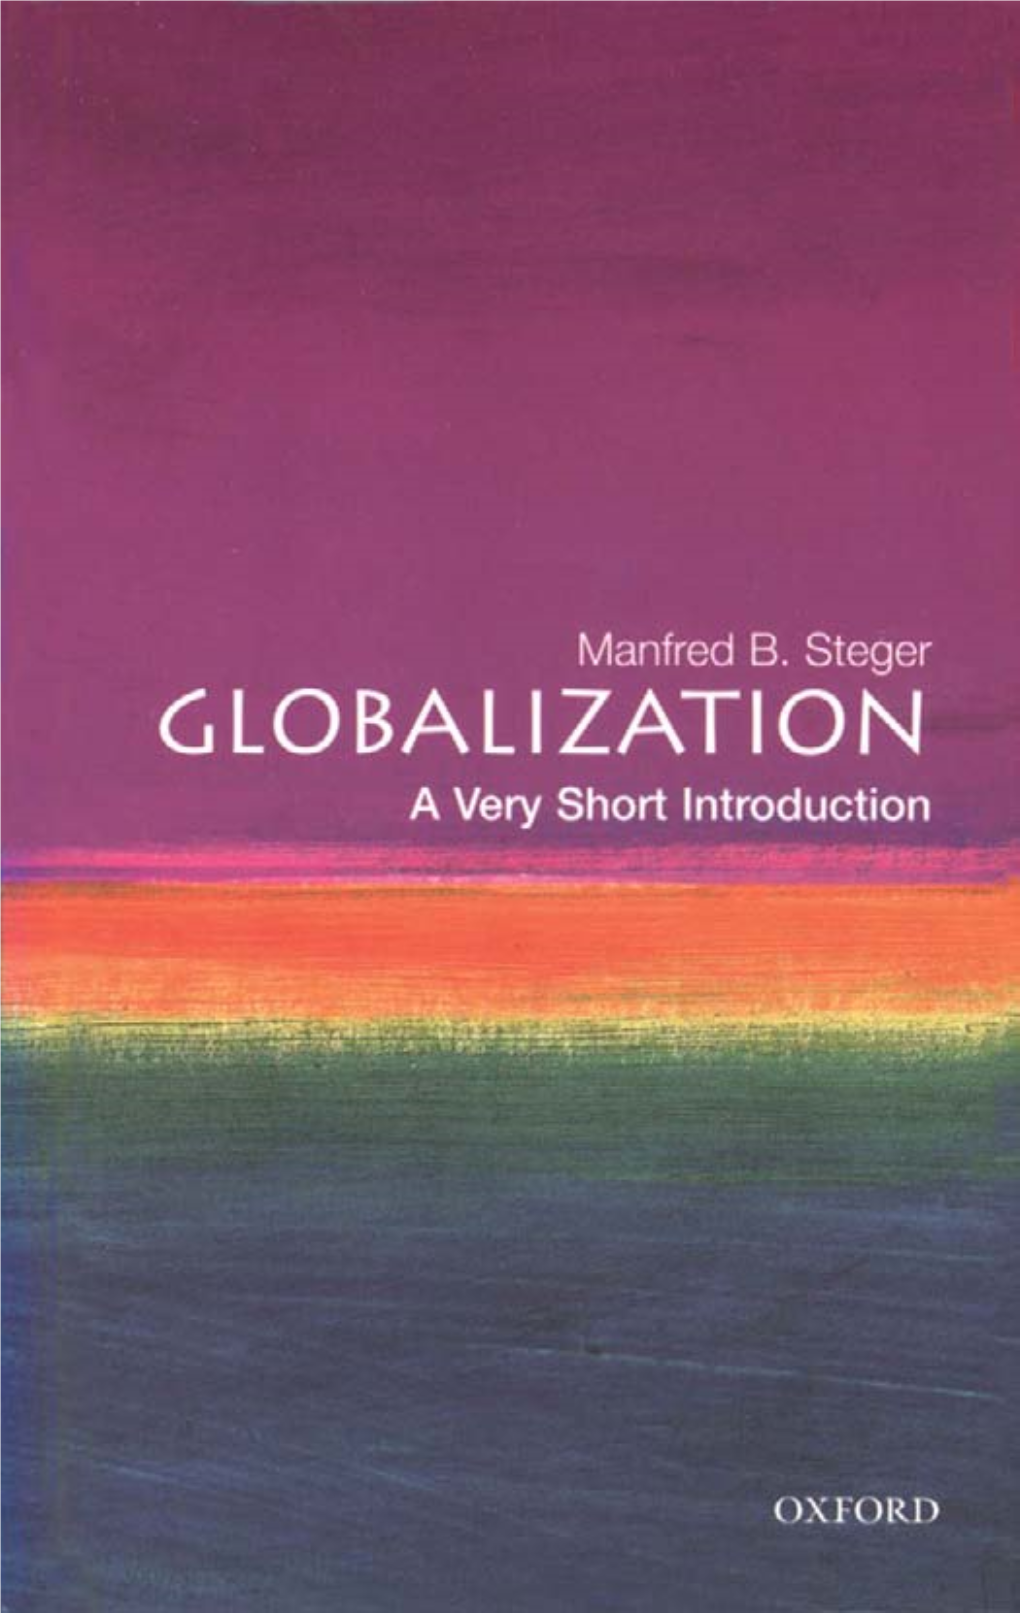 Globalization: a Very Short Introduction VERY SHORT INTRODUCTIONS Are for Anyone Wanting a Stimulating and Accessible Way in to a New Subject